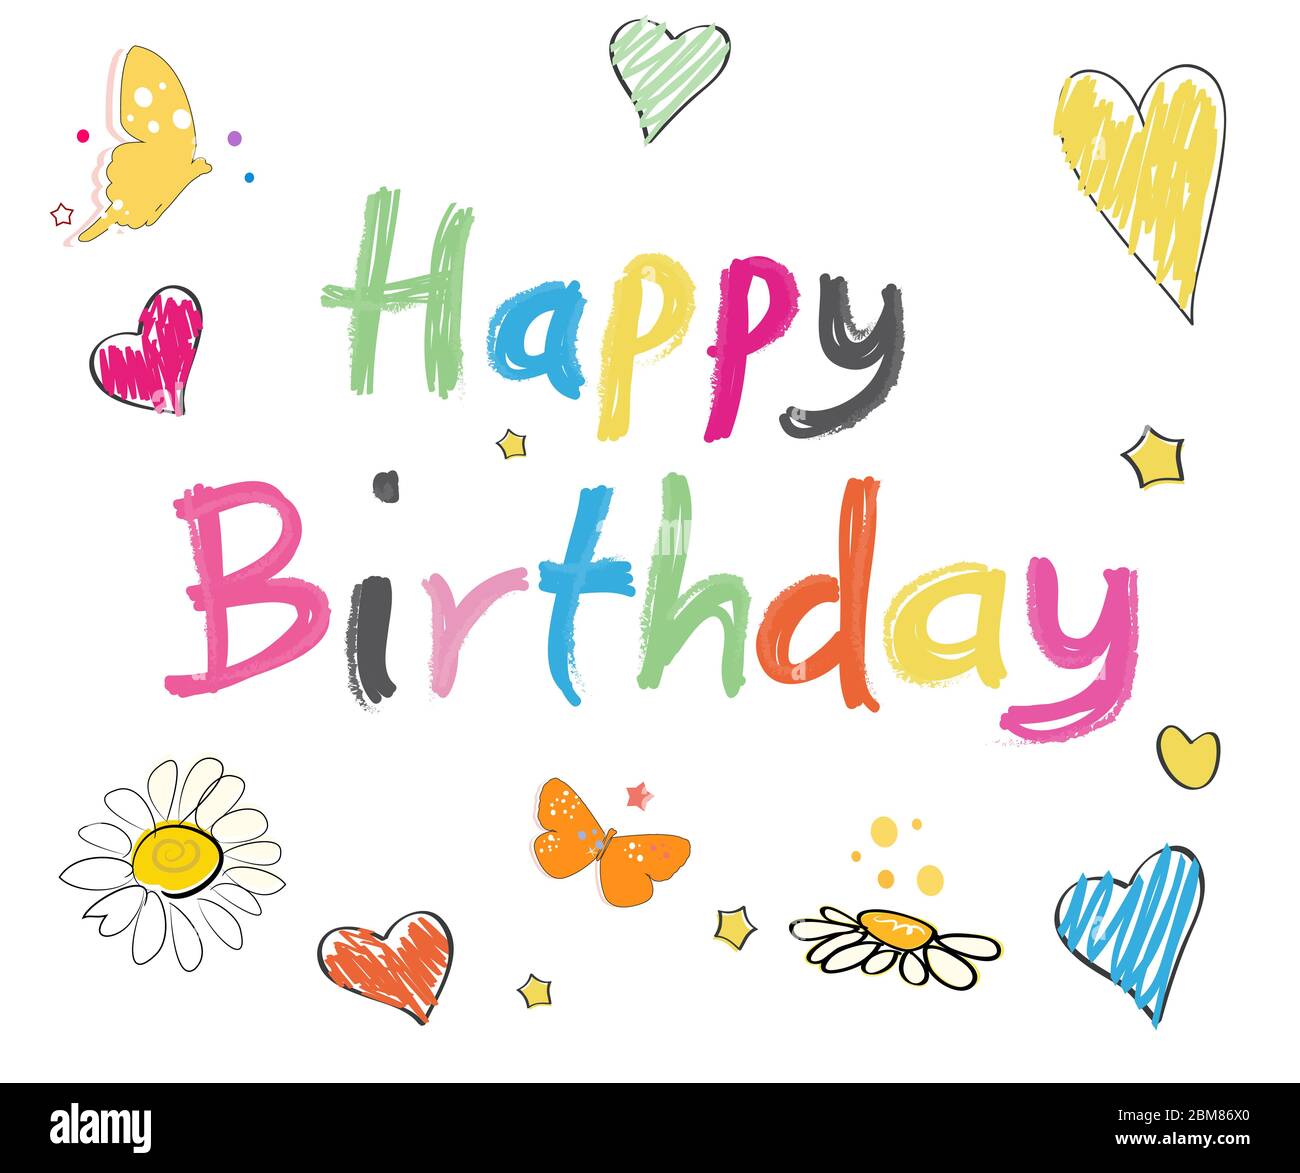 Happy birthday greeting card. '' Happy birthday ''doodle colorful text ...